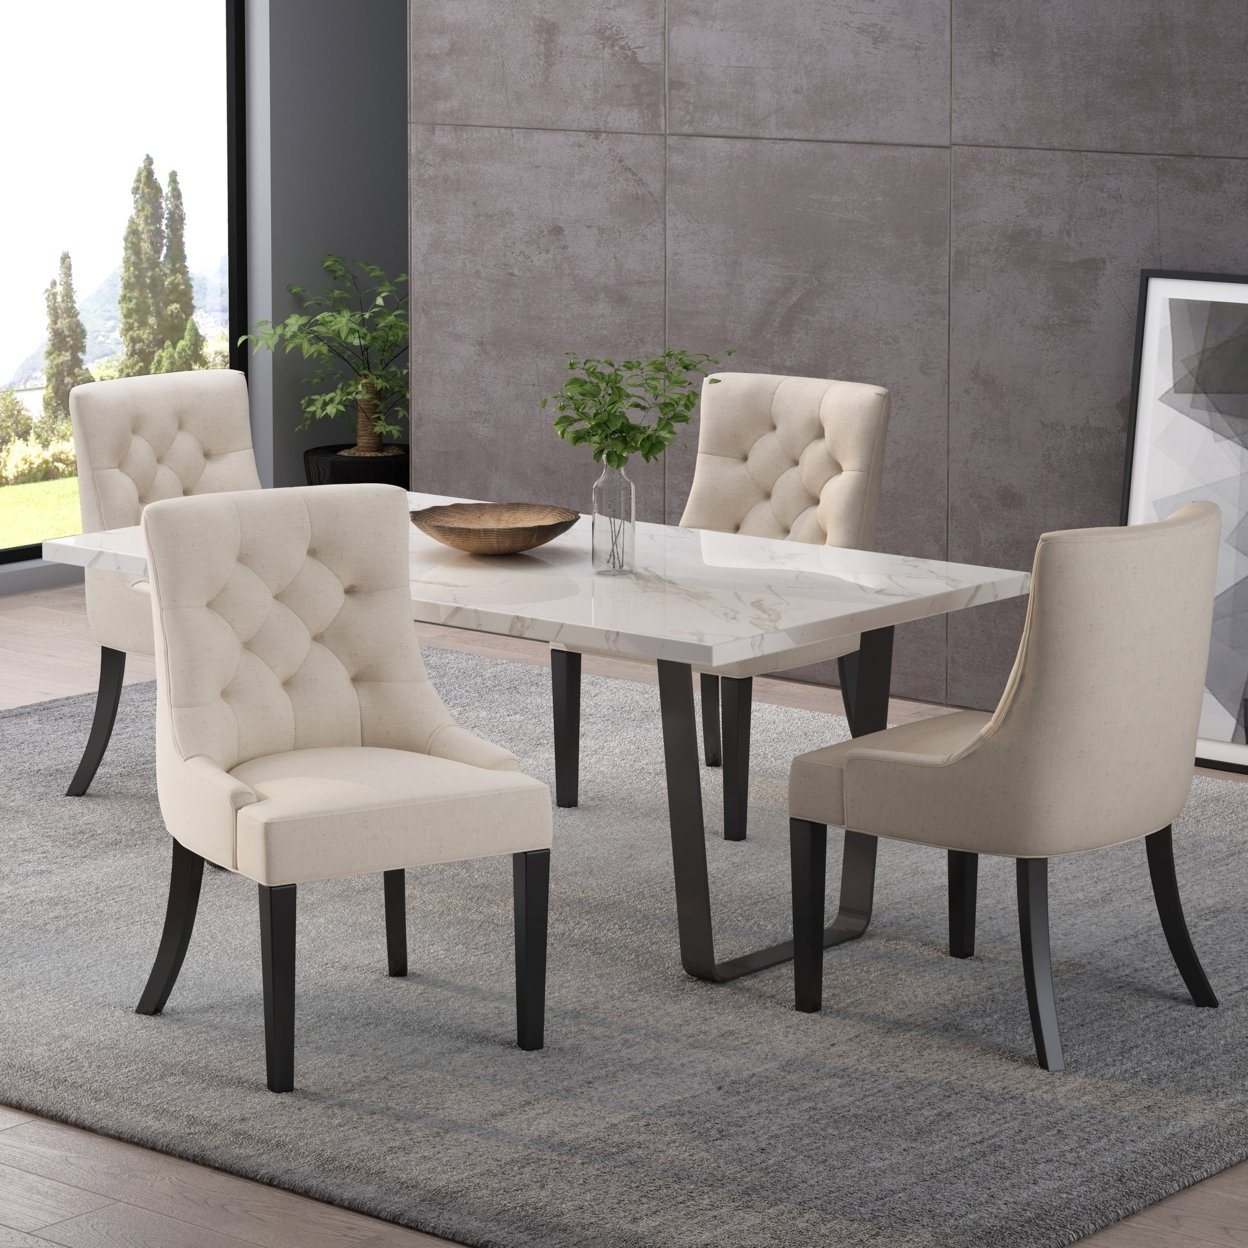 Stacy Hourglass Fabric Dining Chairs (Set Of 4) - Beige